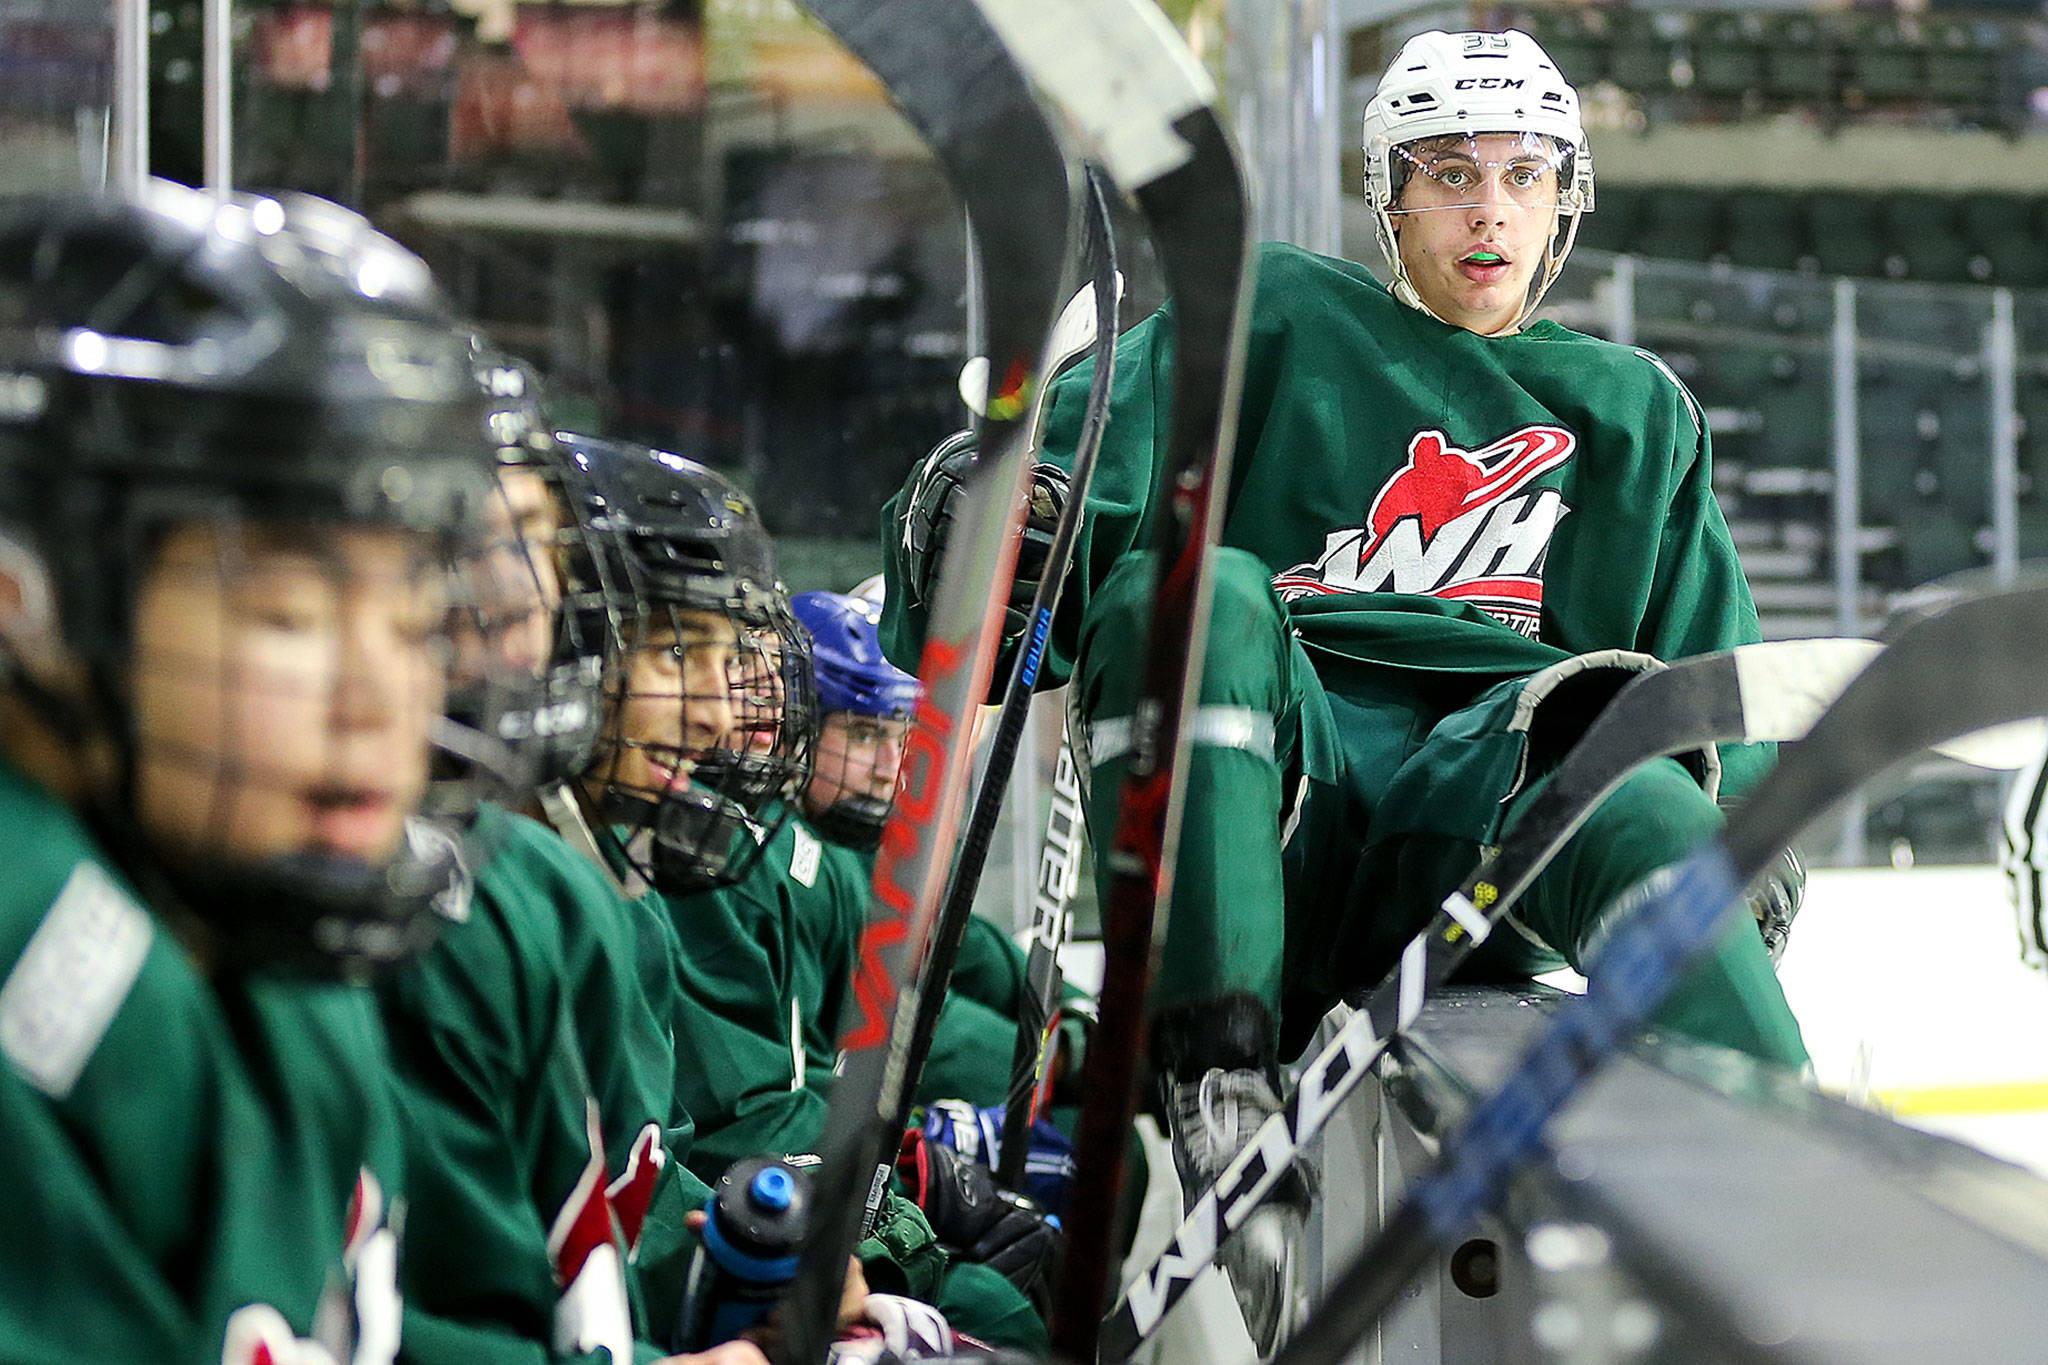 The Silvertips’ Gage Goncalves will move to center after Everett’s trade on Sunday. (Kevin Clark / The Herald)